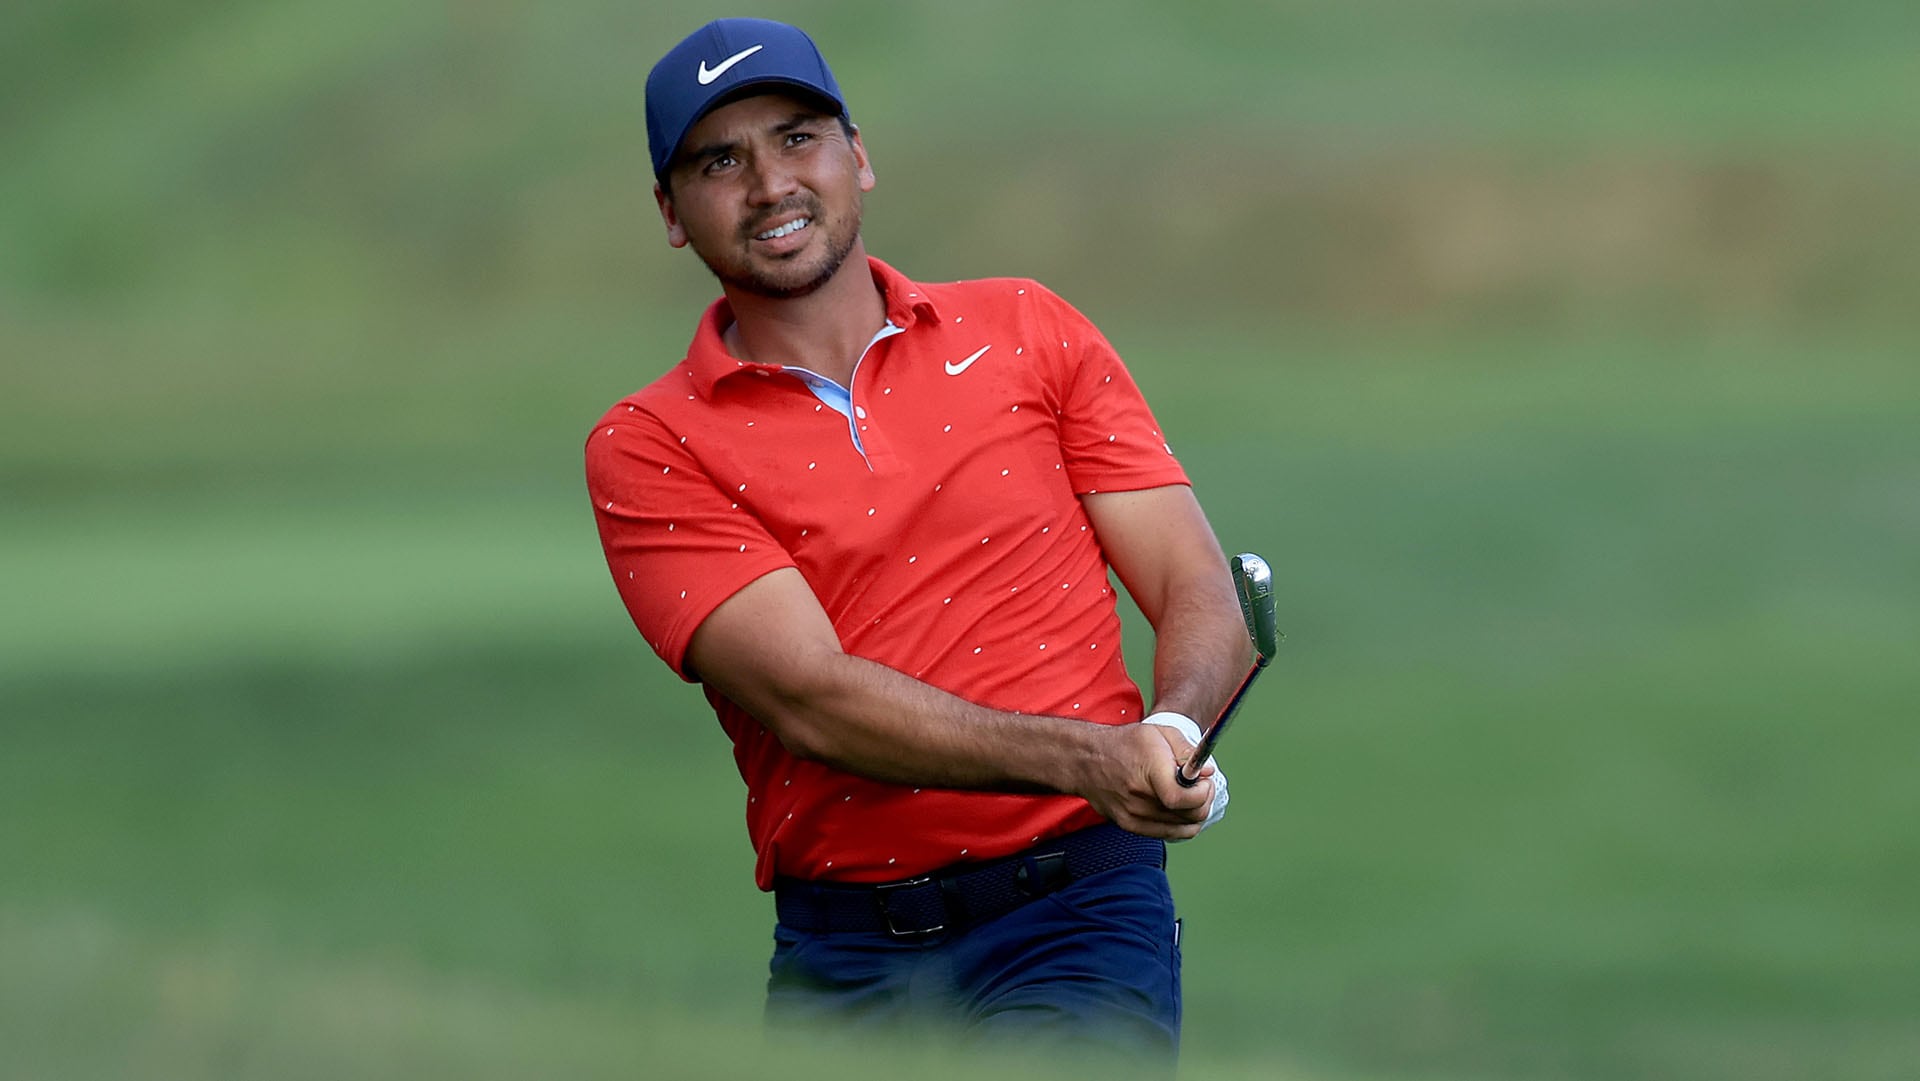 ‘Cautious’ about ongoing back issues, Jason Day sympathizes with Tiger Woods 4